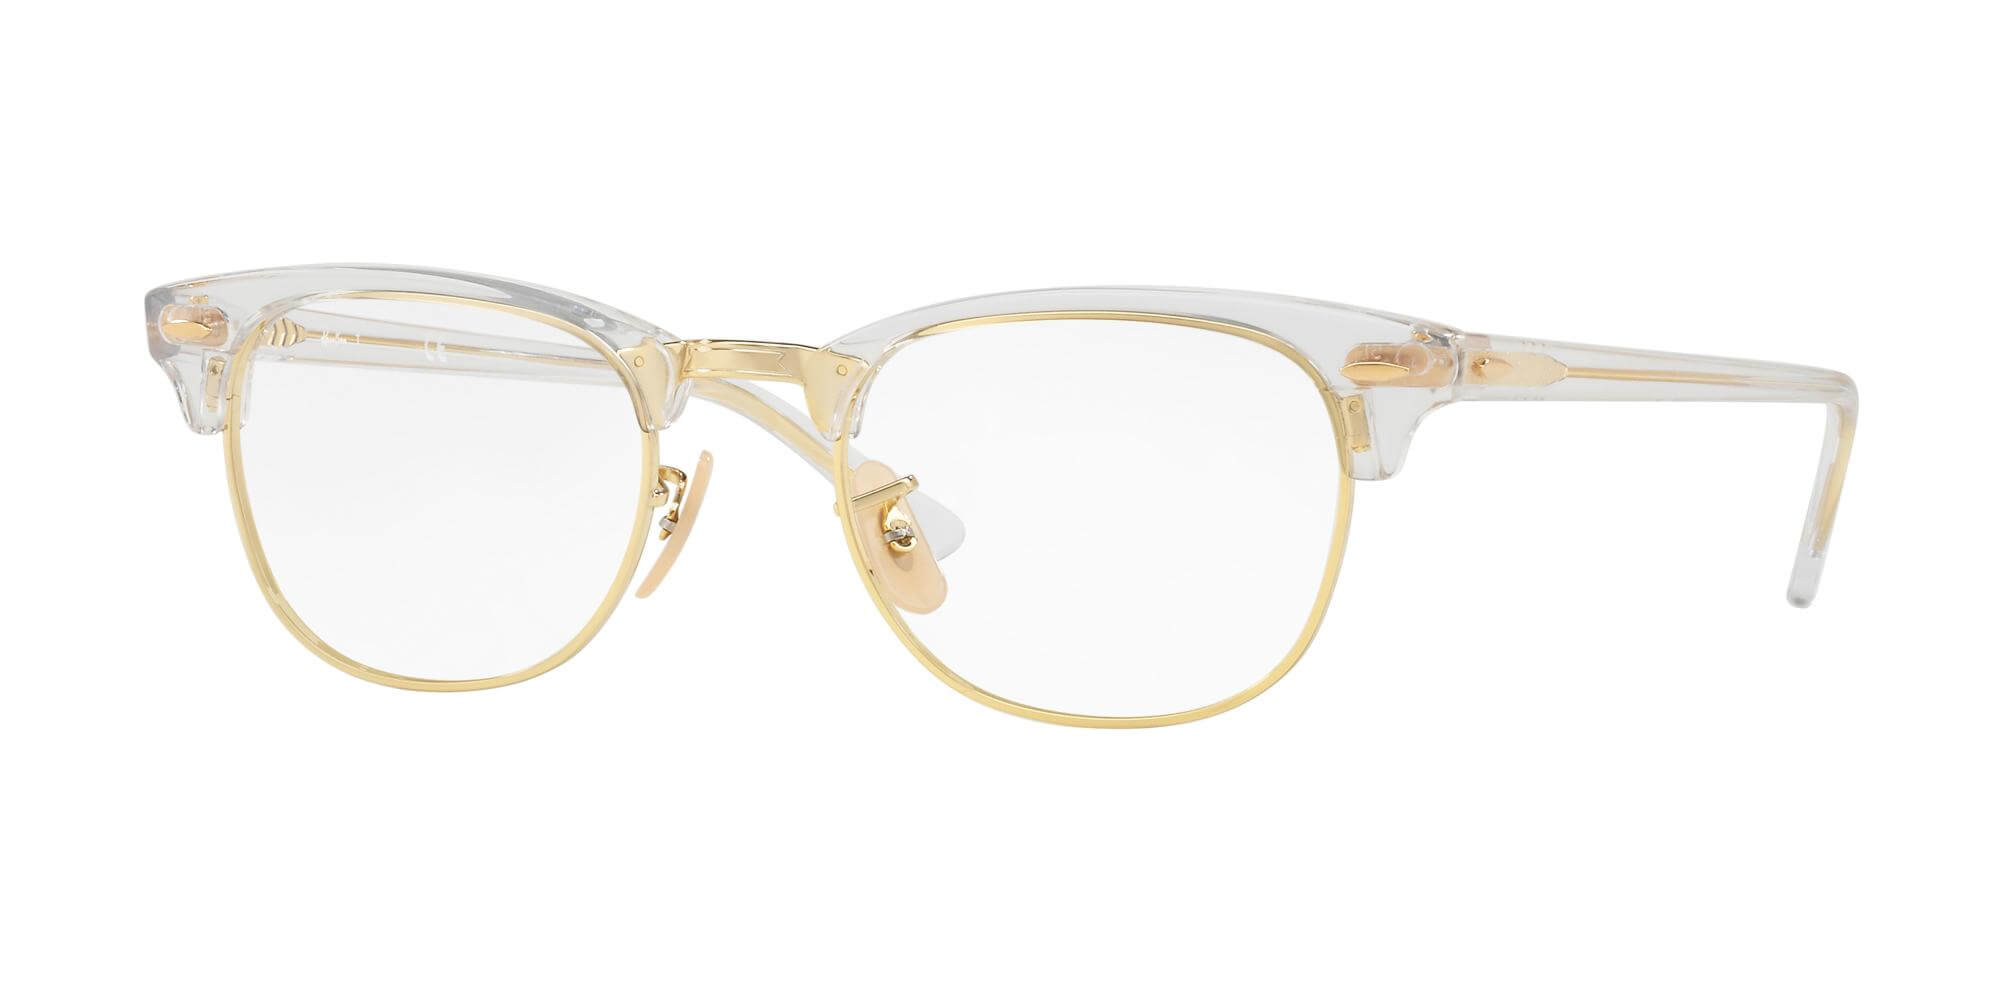 Ray-BanCLUBMASTER RX 5154Crystal Gold (5762)